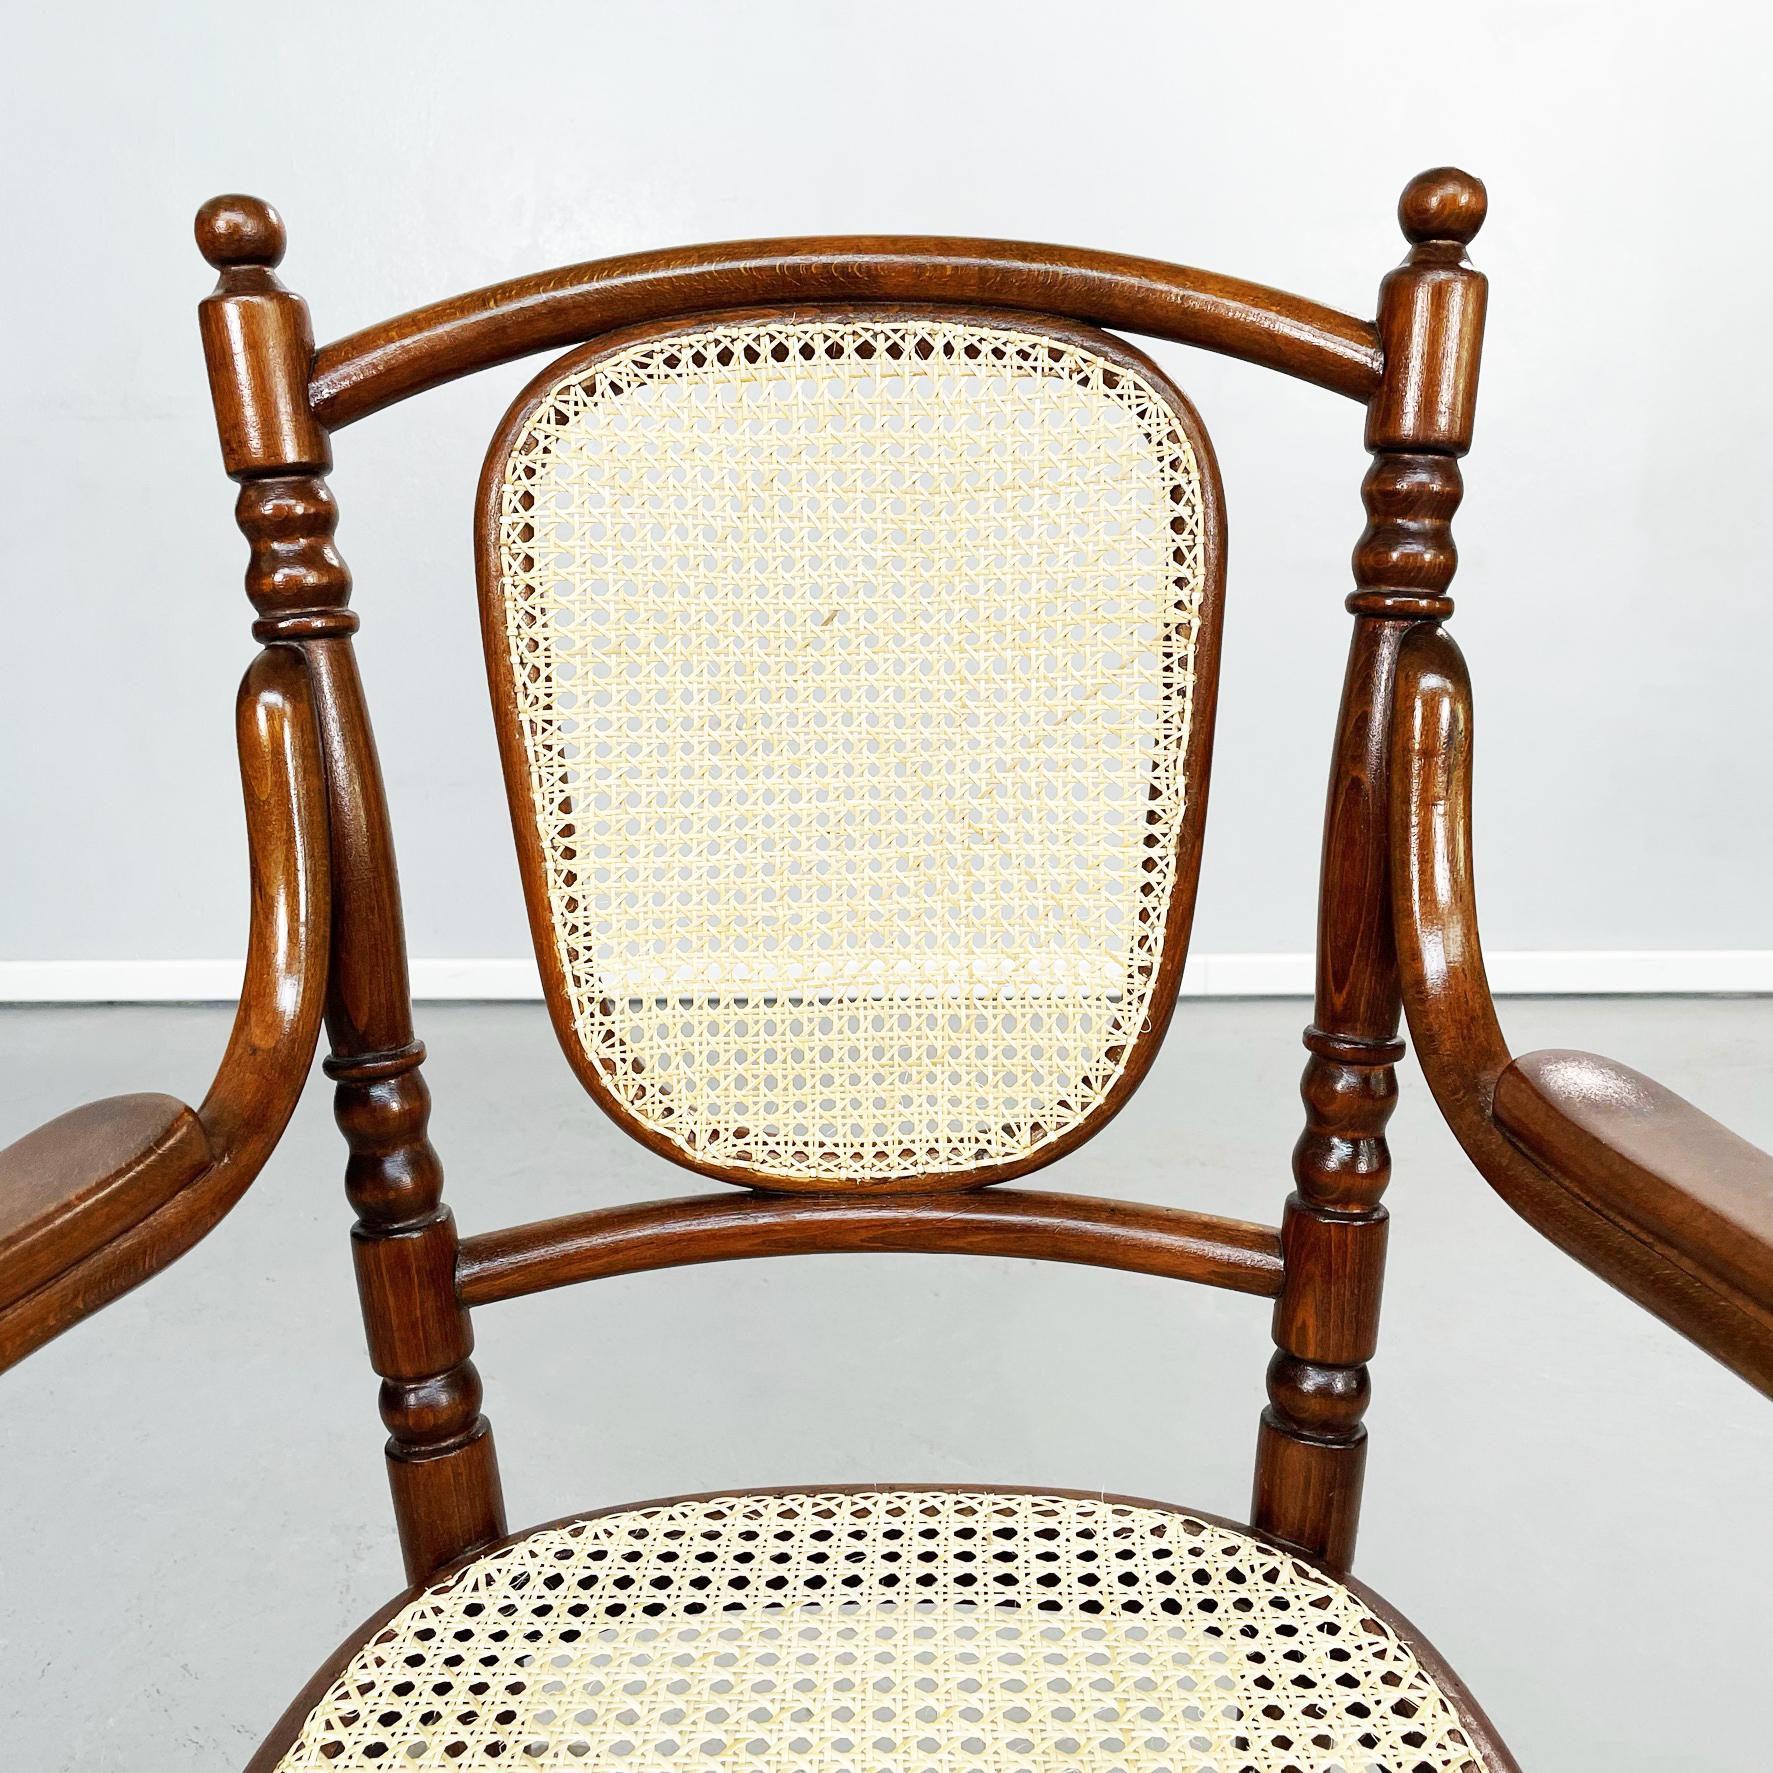 Austrian Chairs with Straw and Wood by Thonet, 1900s For Sale 1